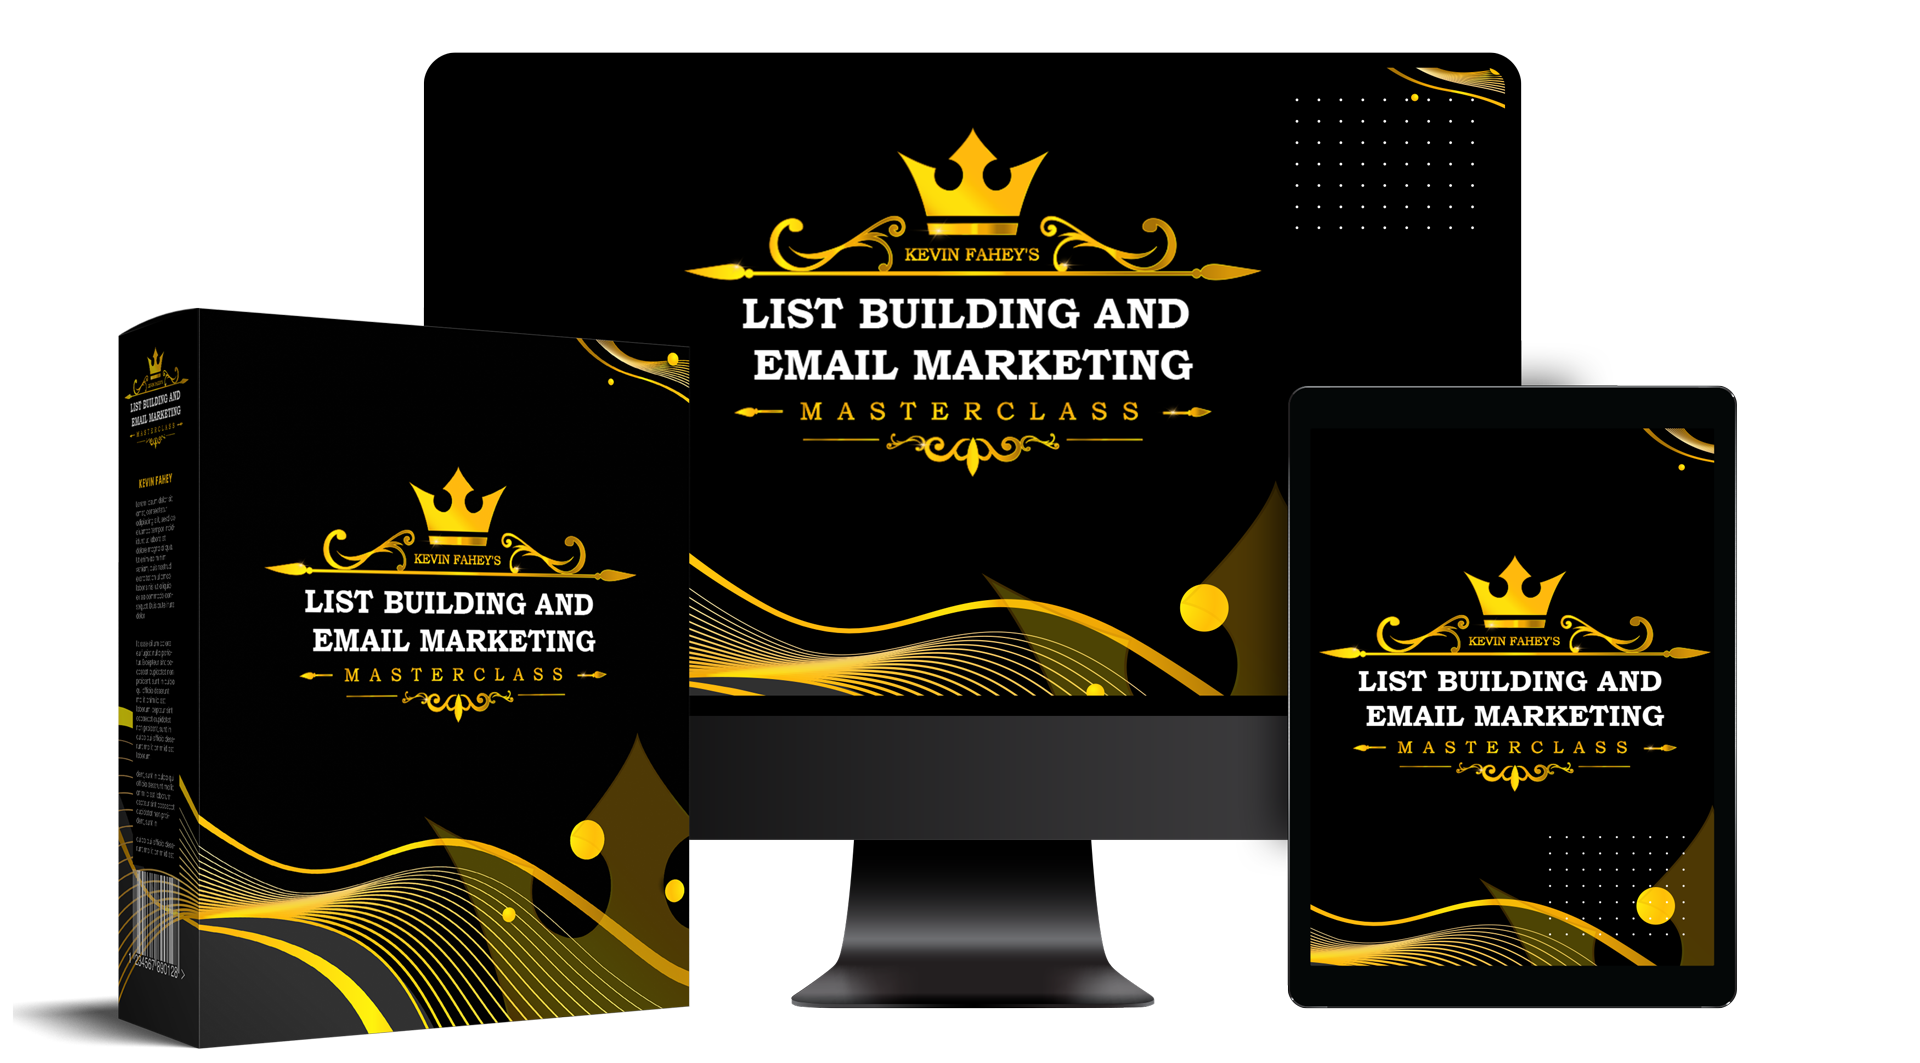 Kevin Fahey's List Building & Email Marketing MasterClass